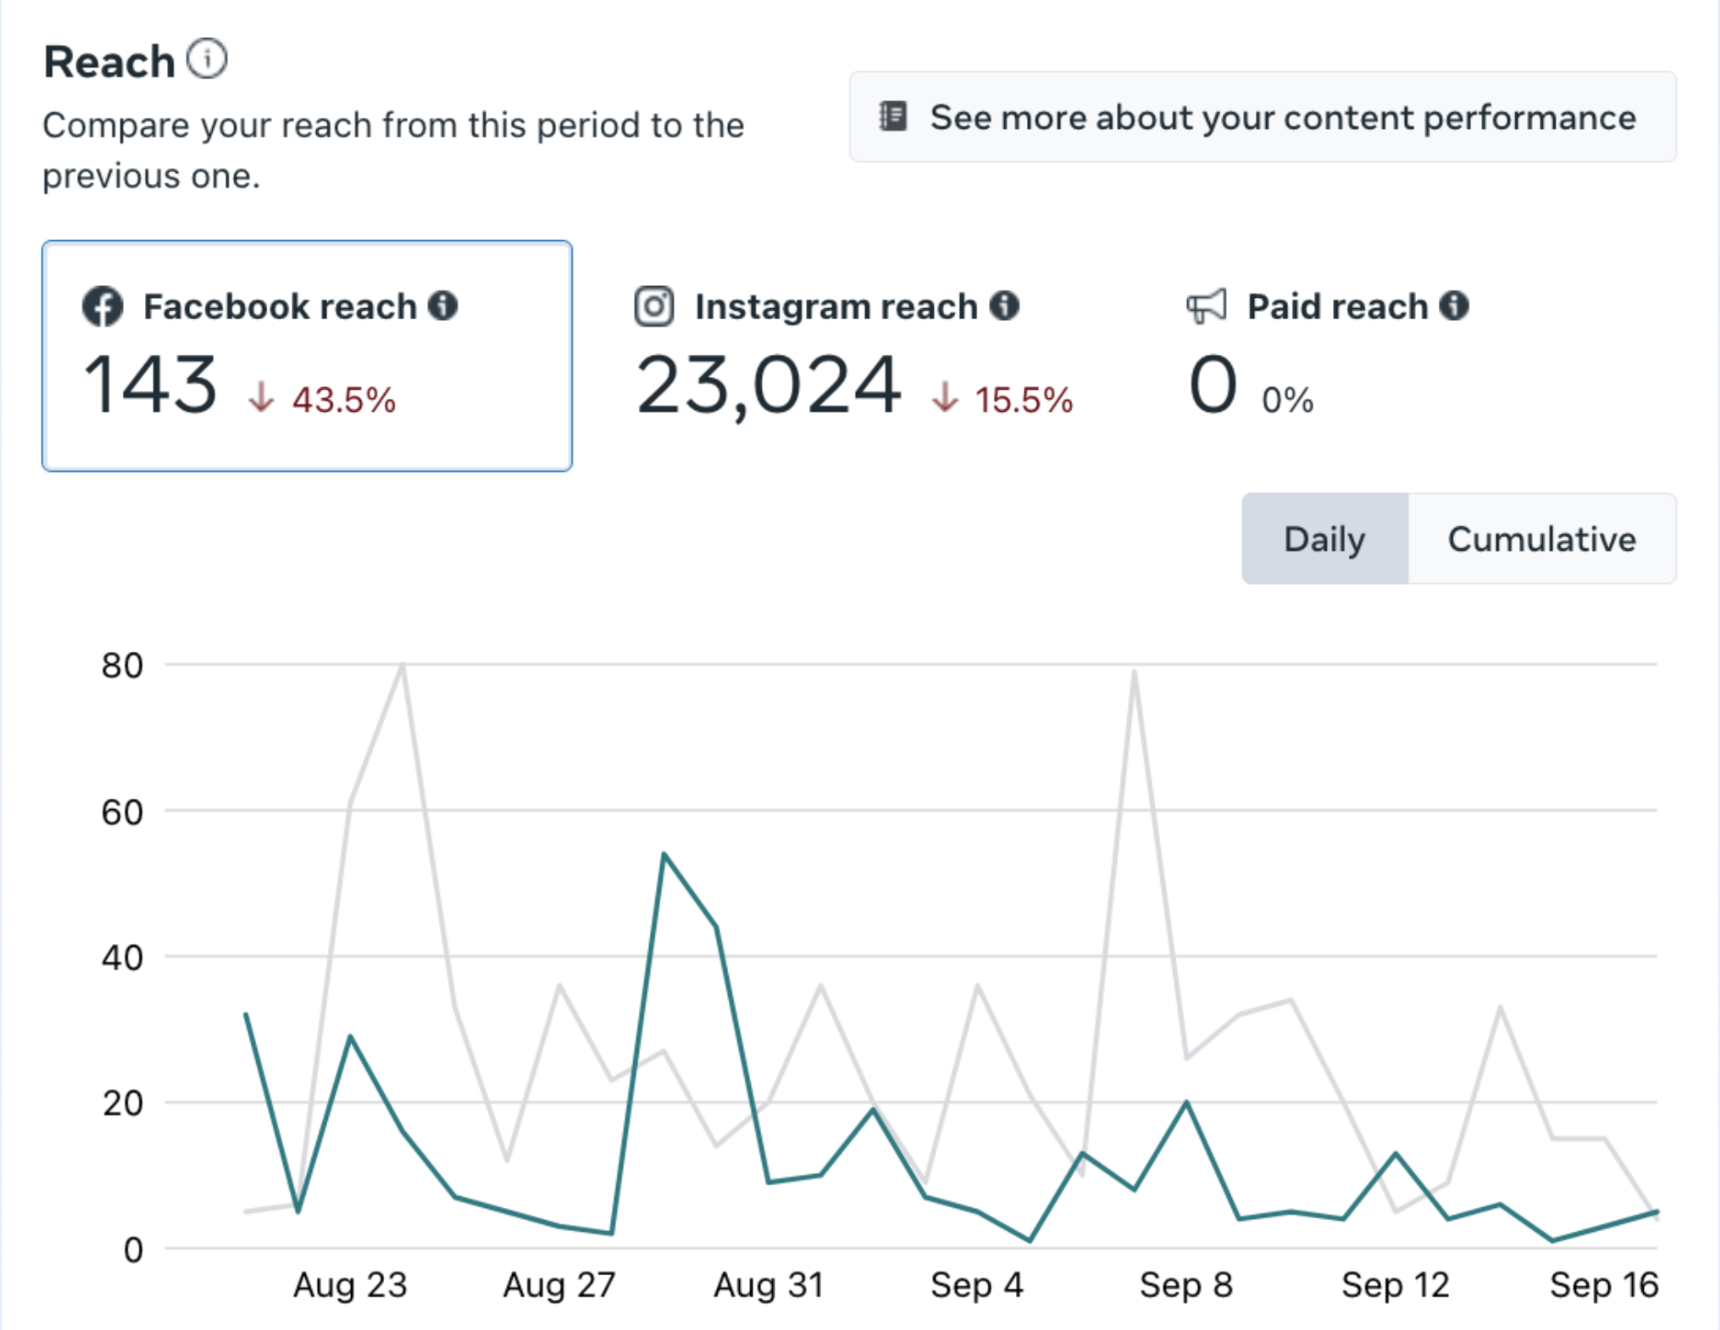 Preview of insights Overview in Creator Studio. The image shows Reach data such as Facebook reach, Instagram reach and paid reach. 